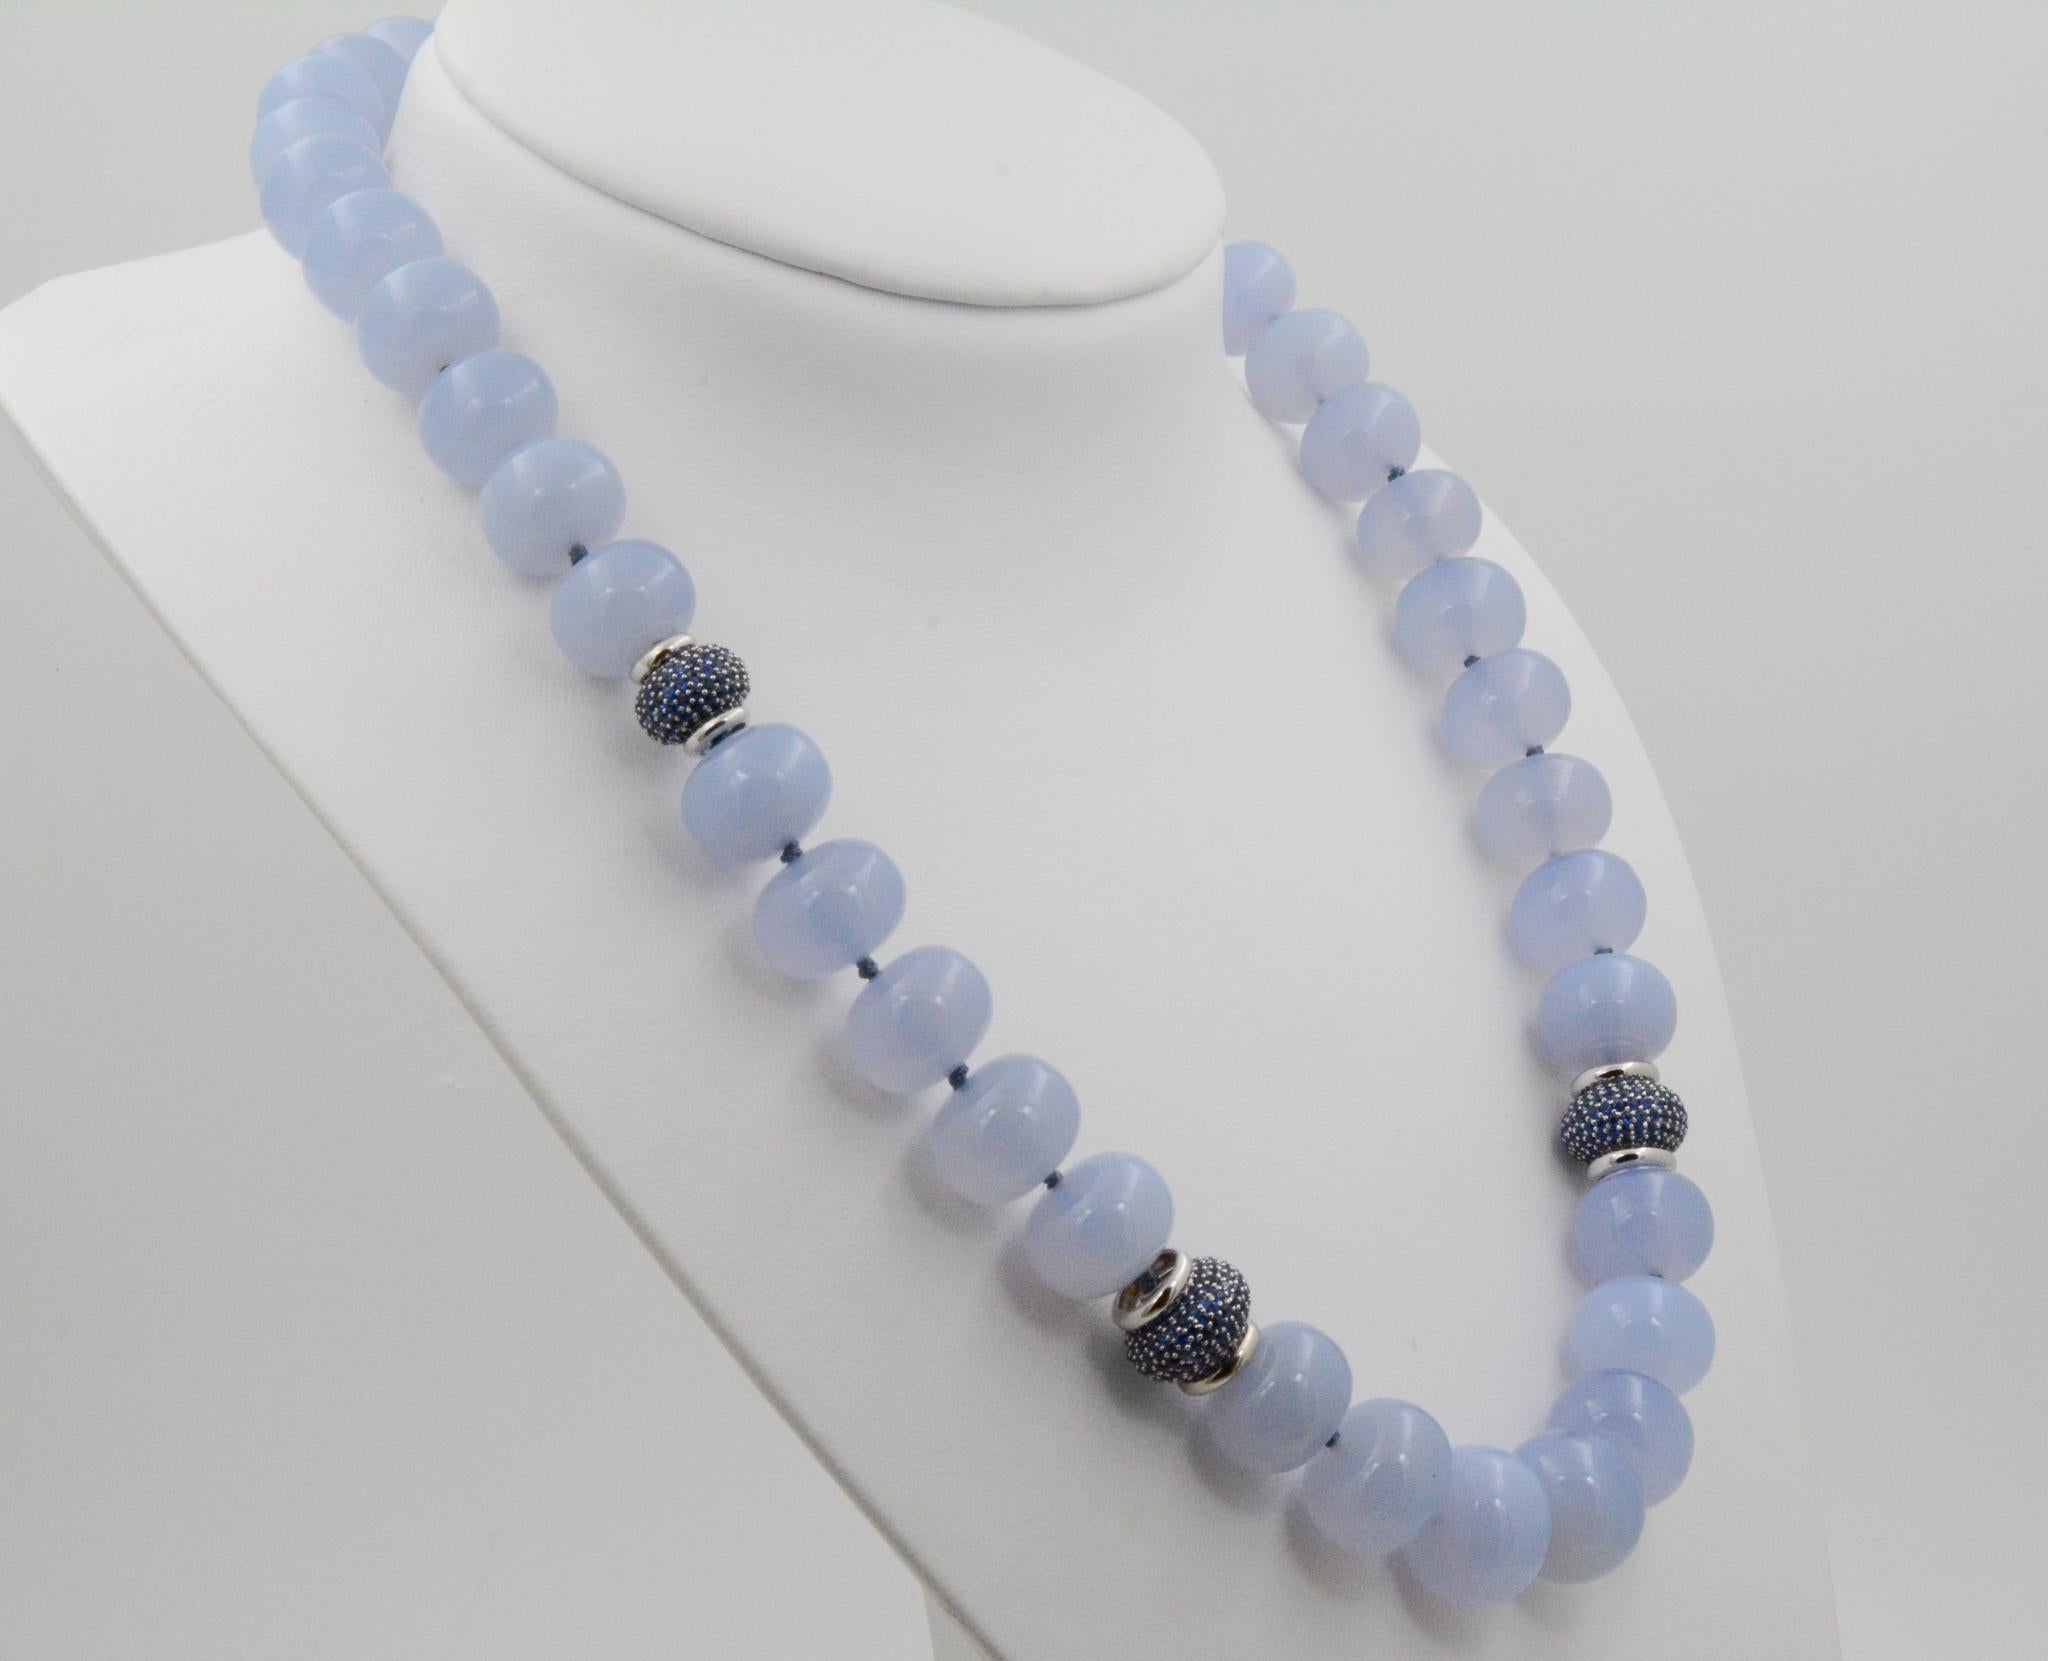 From Seaman Schepps, this 20 inch 18 karat white gold necklace features blue chalcedony beads with pave sapphire rondelles. It is paired with clasps set in 18 karat white gold. The necklace is signed Seaman Schepps. 